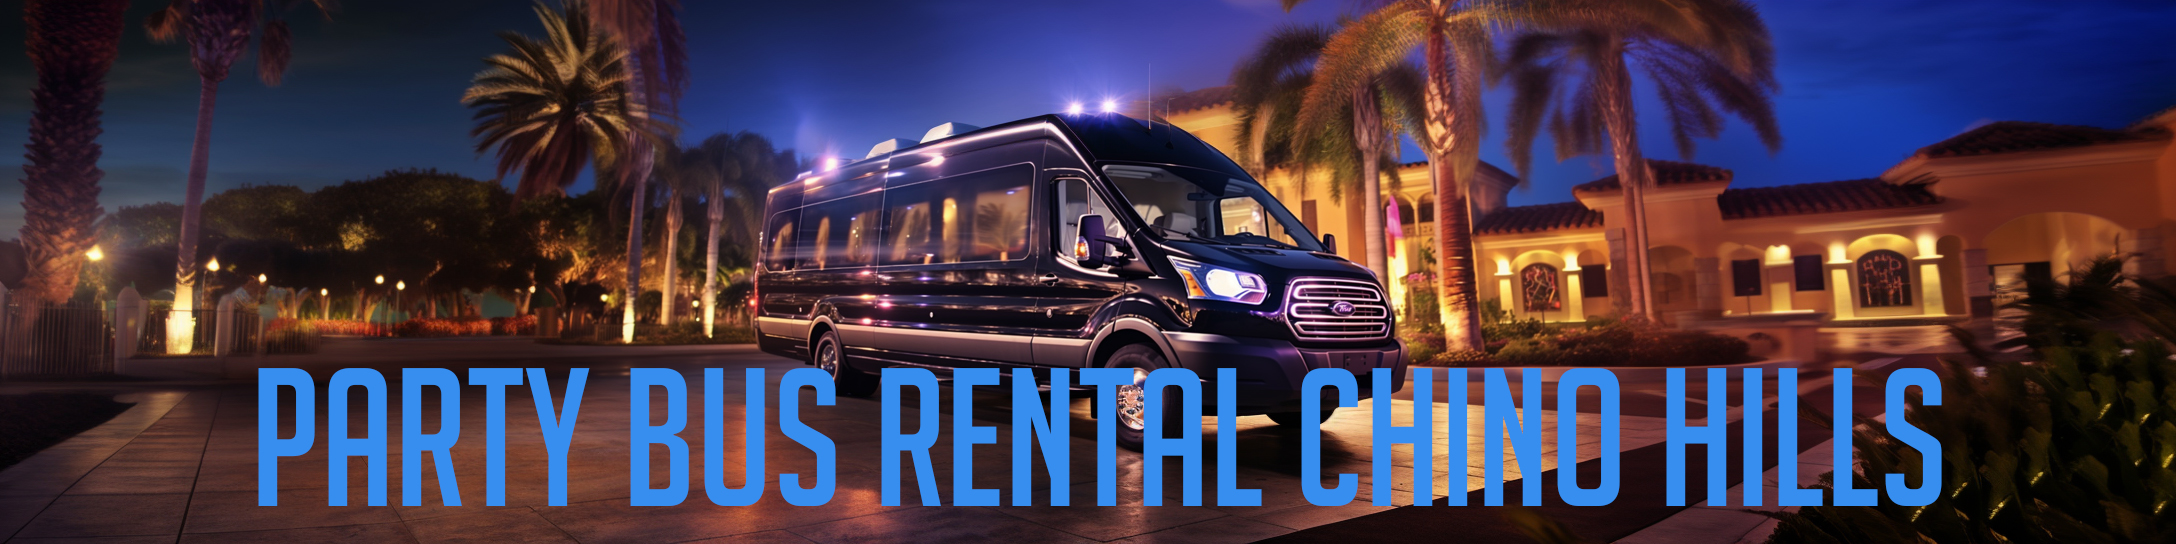 Party Bus Rental Chino Hills